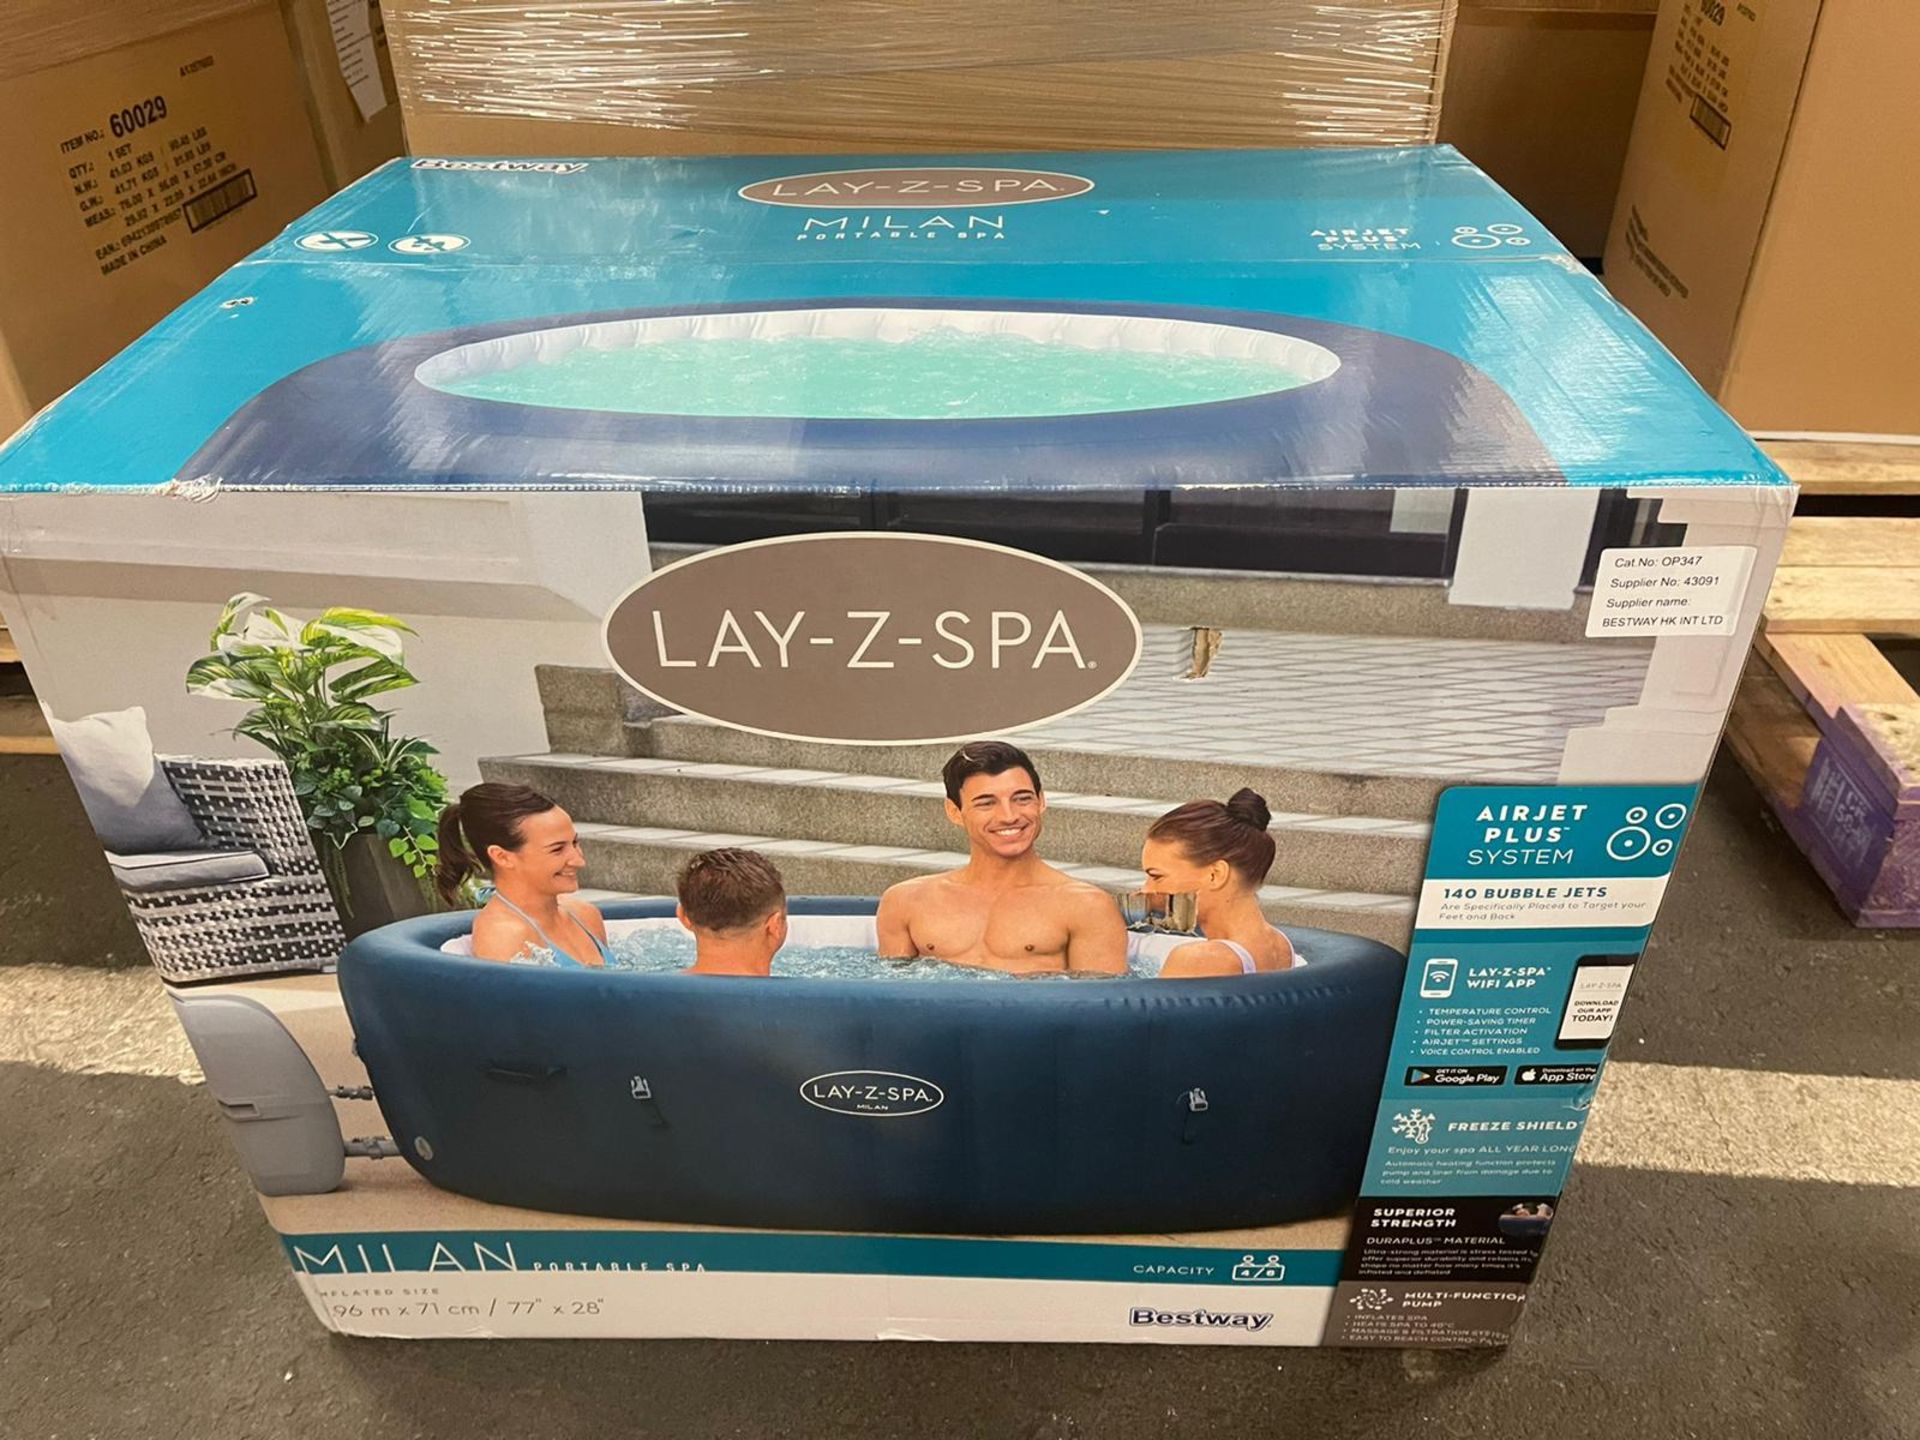 RRP £714.99 - Lay-Z-Spa 60029 Milan Airjet Plus Inflatable Hot Tub, 6 Person - 196L x 196W x 71H - Image 4 of 4